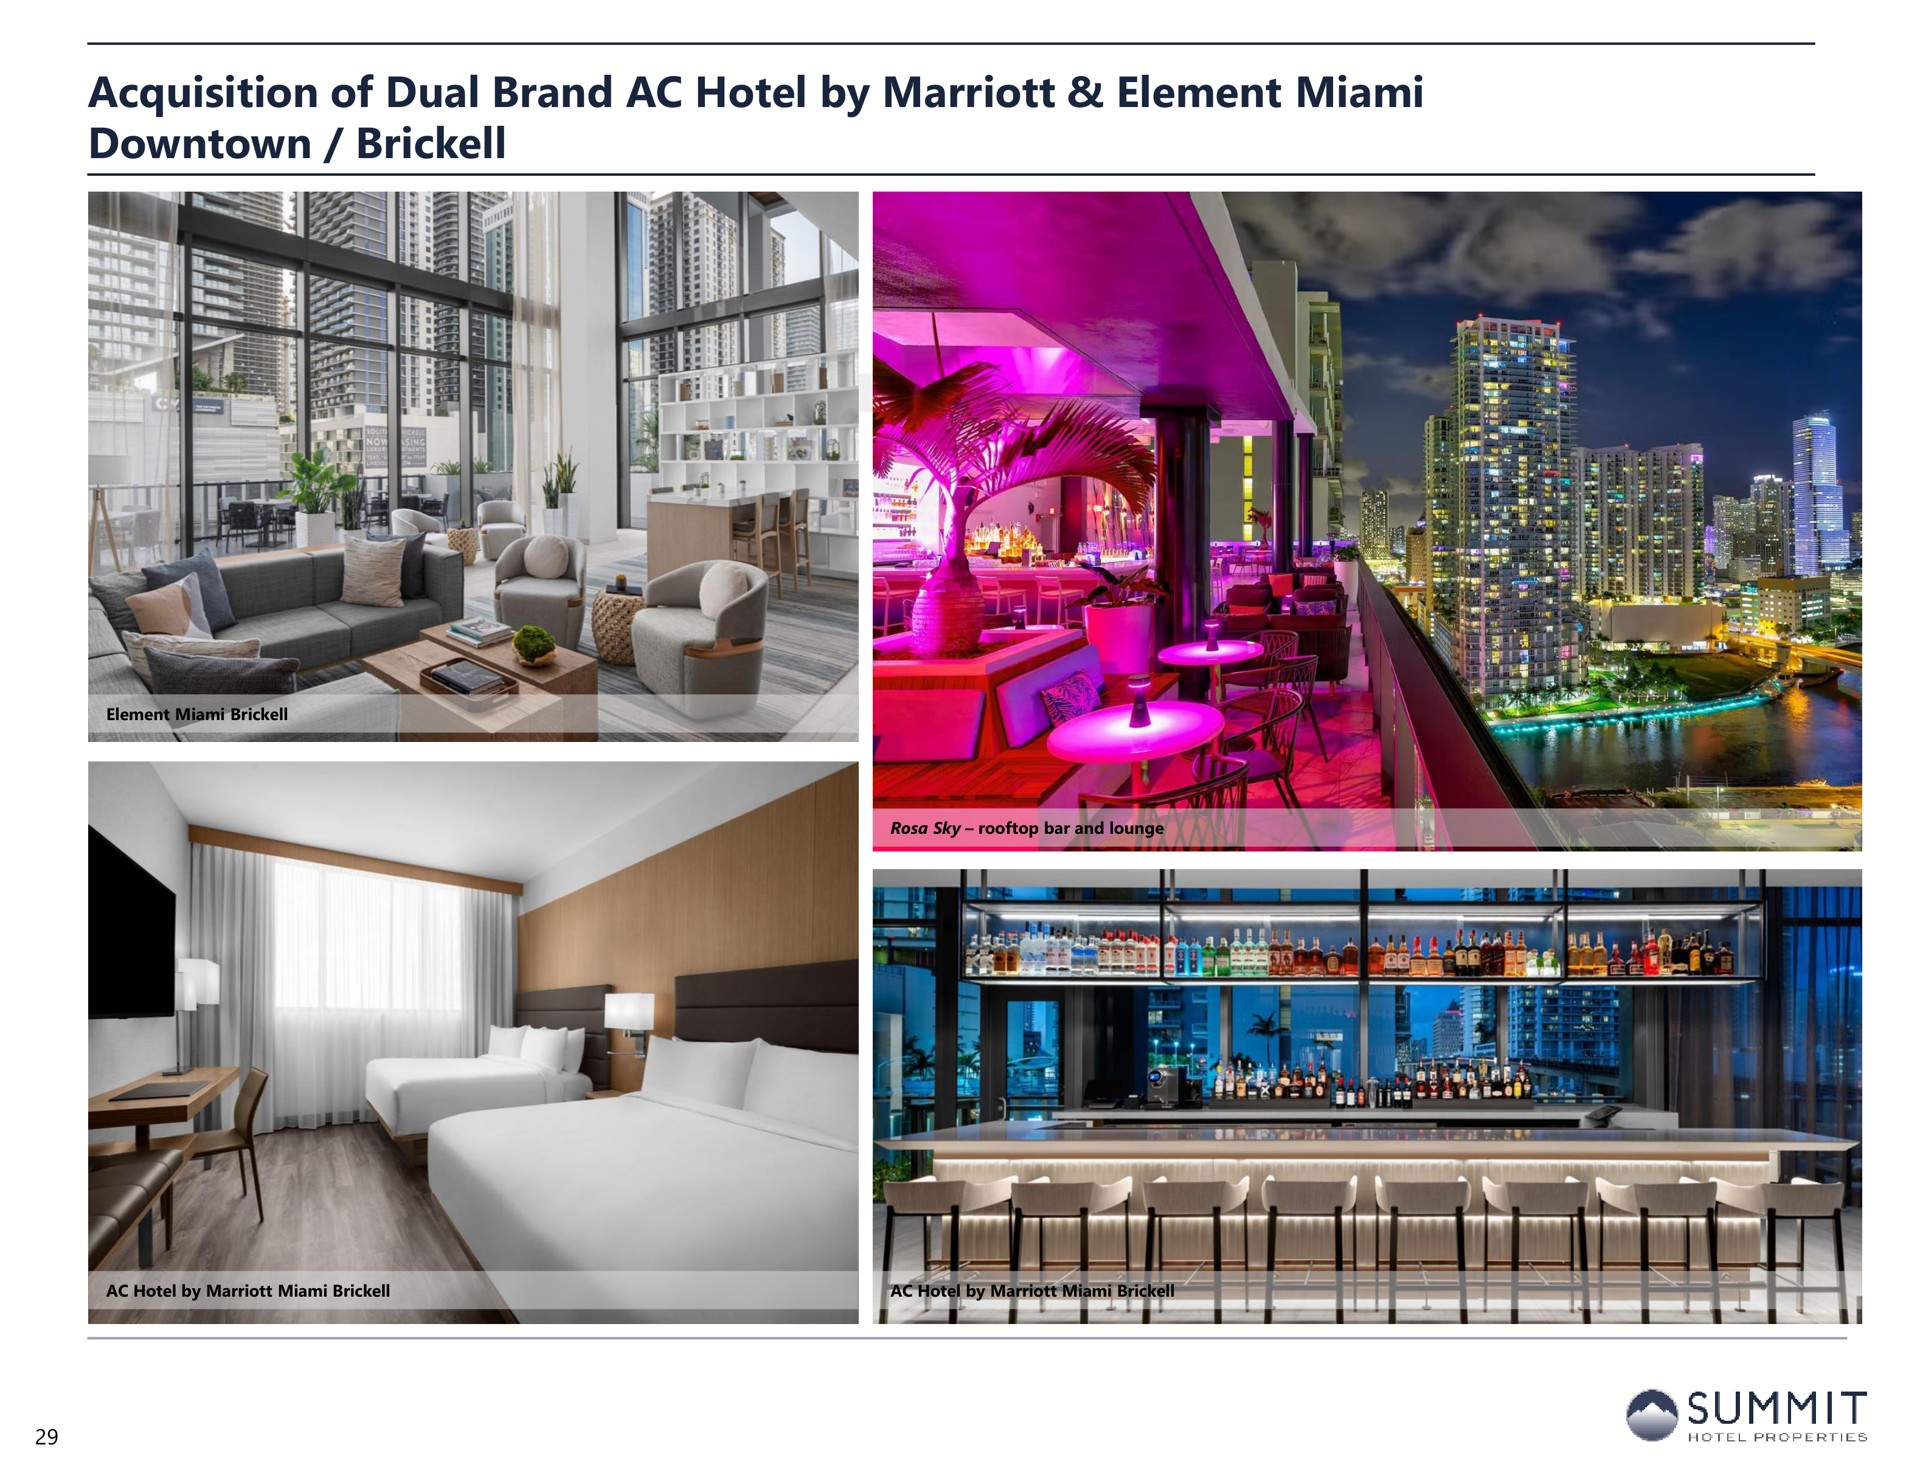 acquisition of dual brand hotel by element downtown ate summit | Summit Hotel Properties